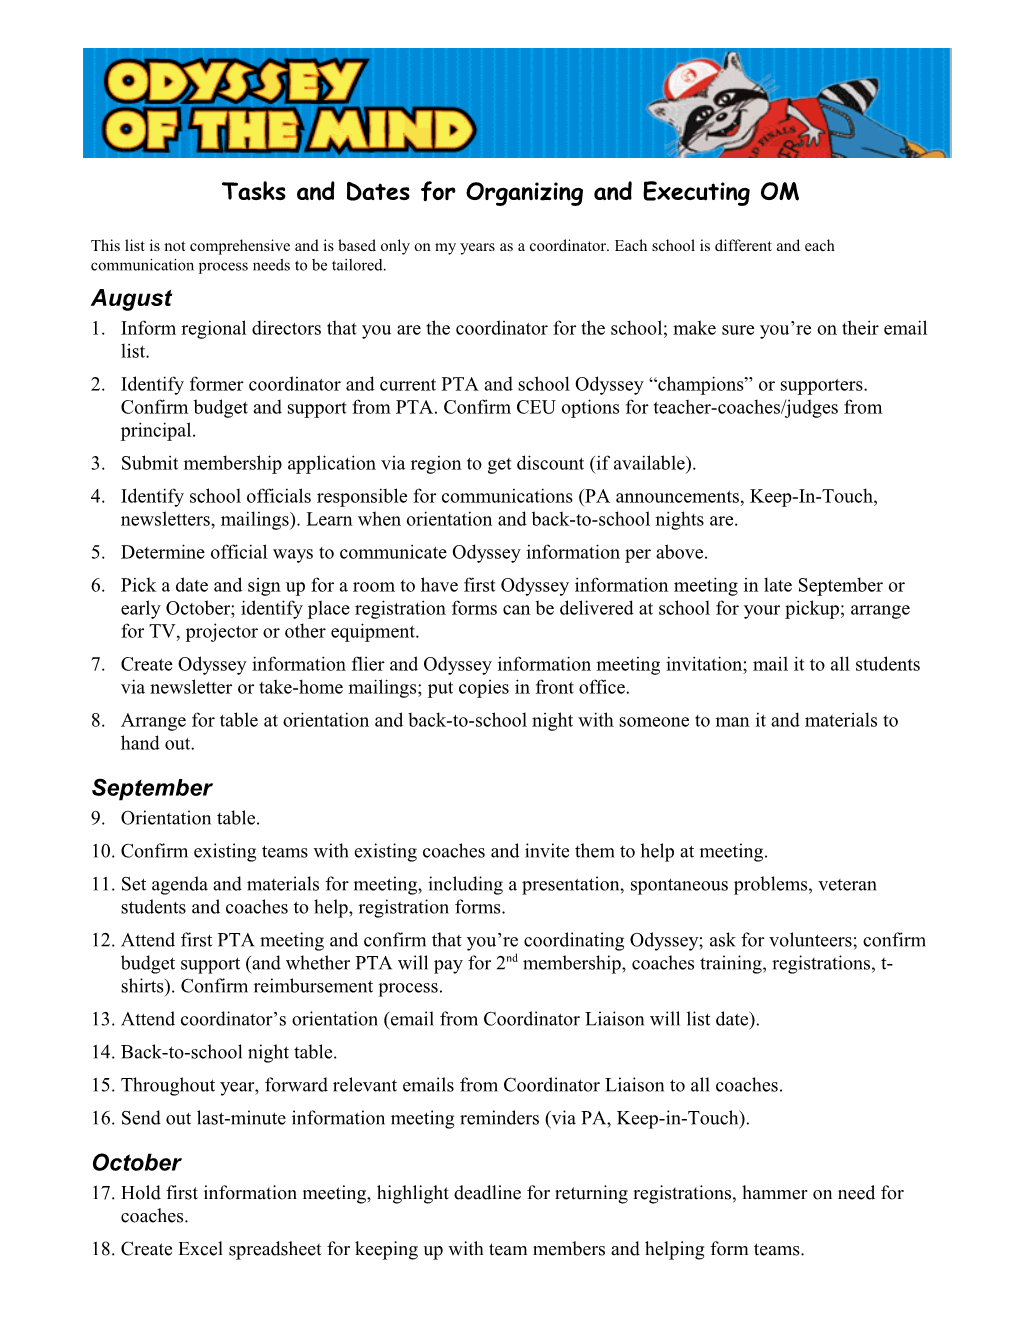 Tasks and Dates for Organizing and Executing OM